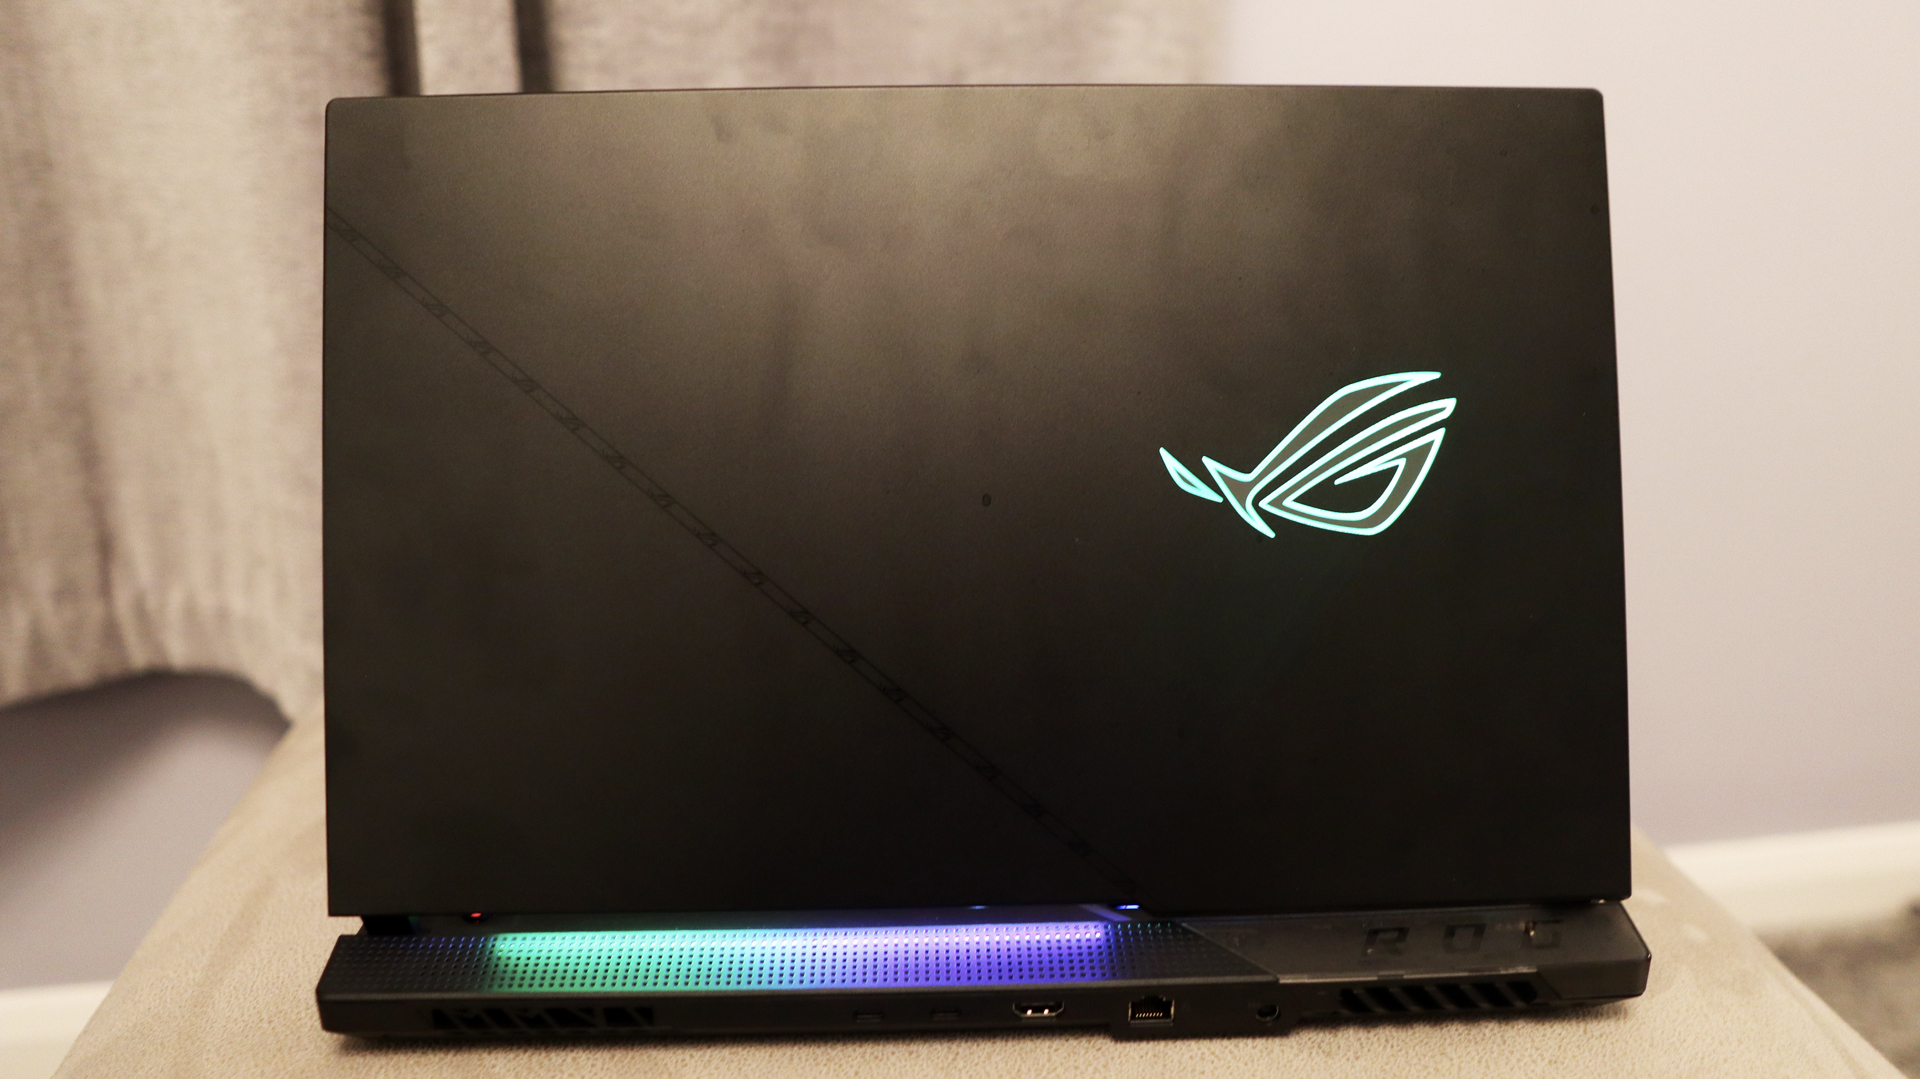 Asus ROG Strix Scar 17 review: A gaming laptop placed upon a beige stand, its plastic chassis illuminated by an RGB logo